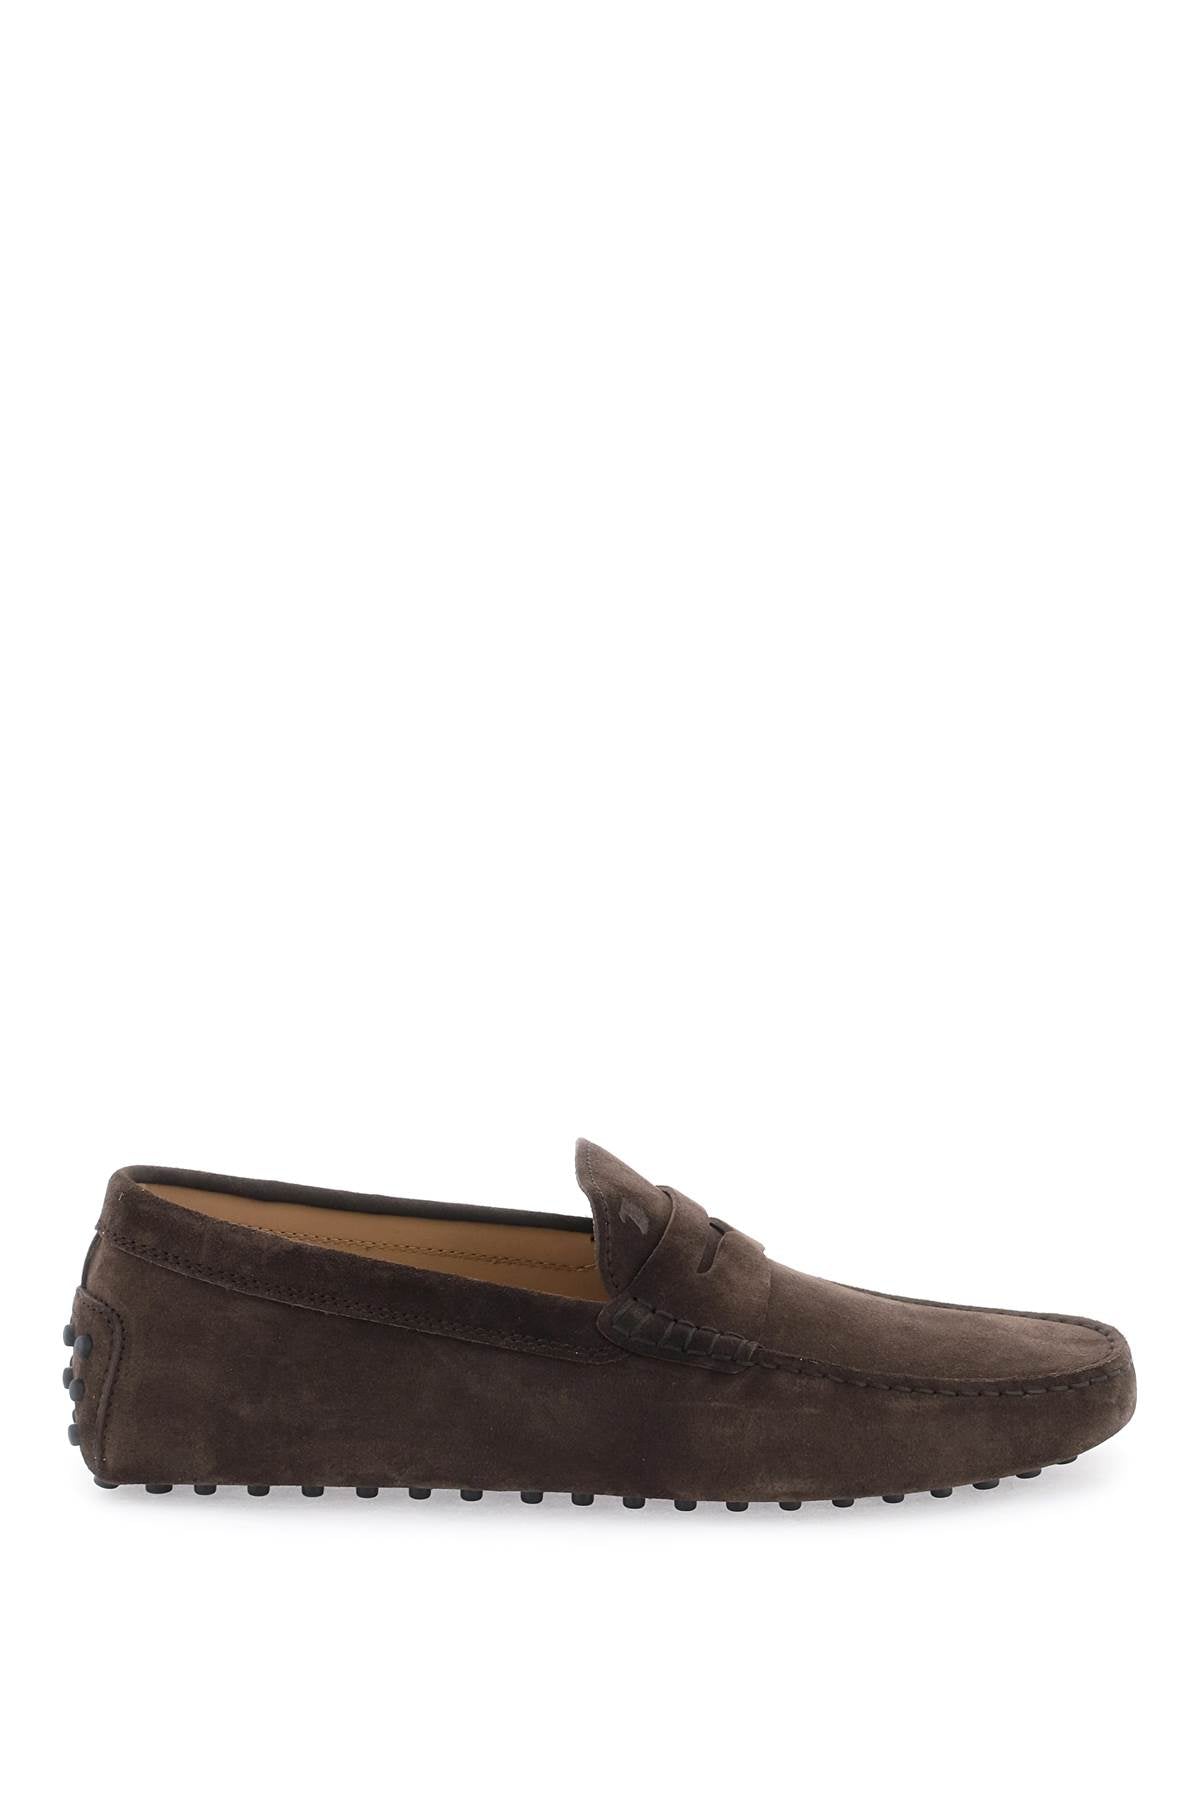 Tod'S Gommino Loafers-Tod'S-Urbanheer